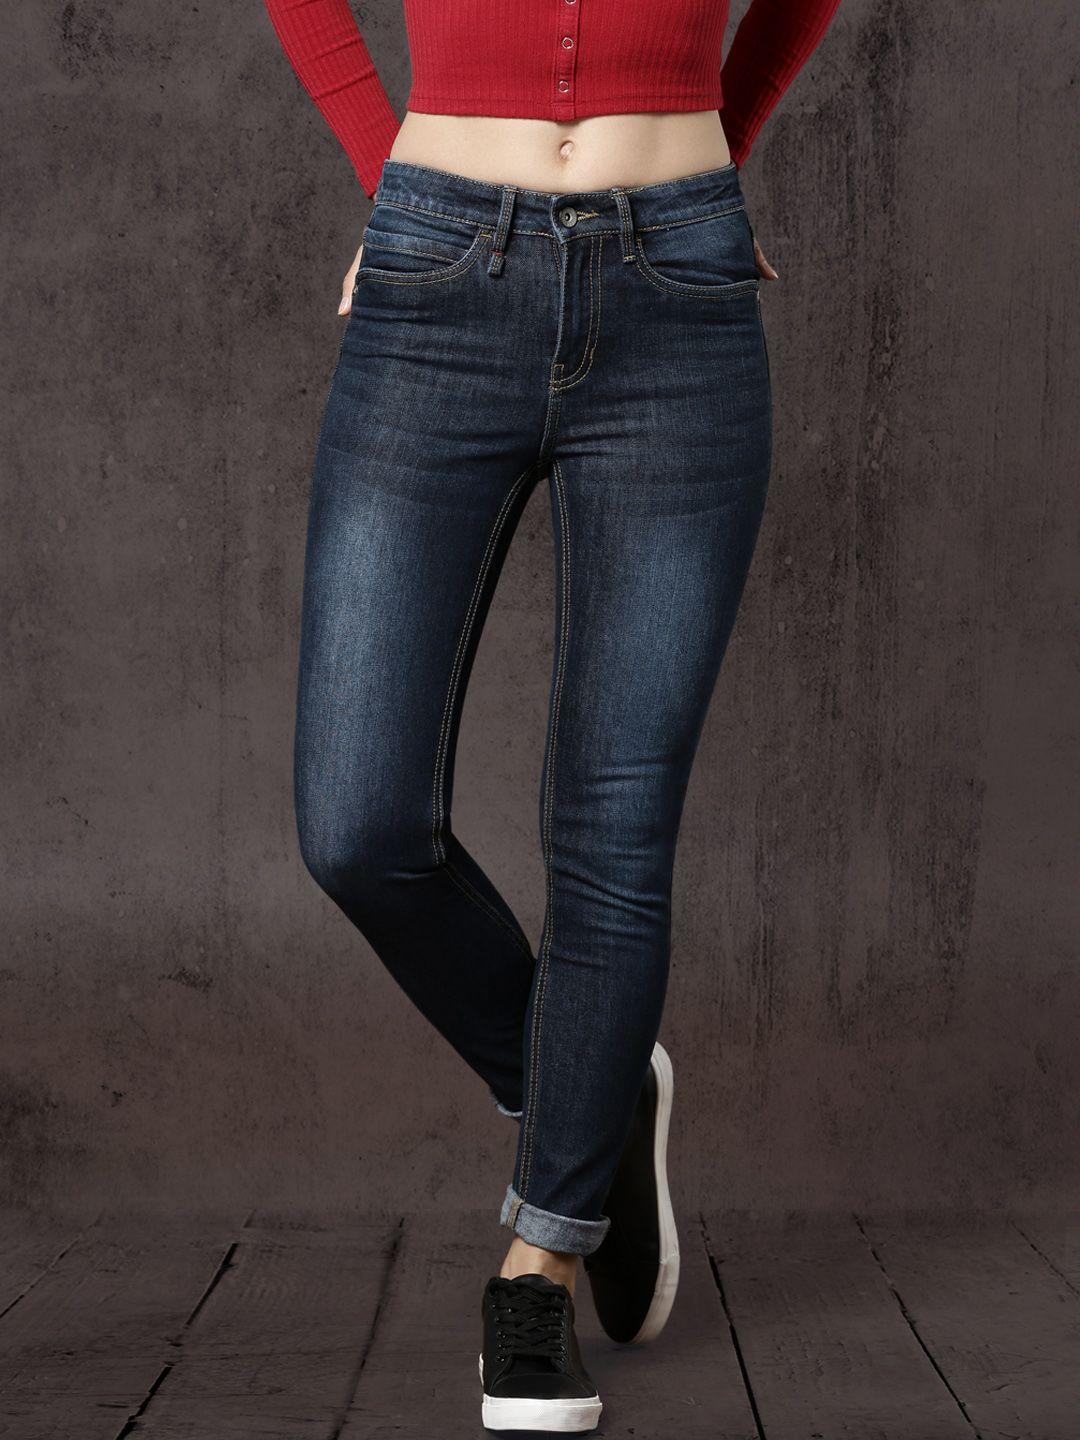 roadster-women-navy-blue-skinny-fit-mid-rise-clean-look-stretchable-jeans